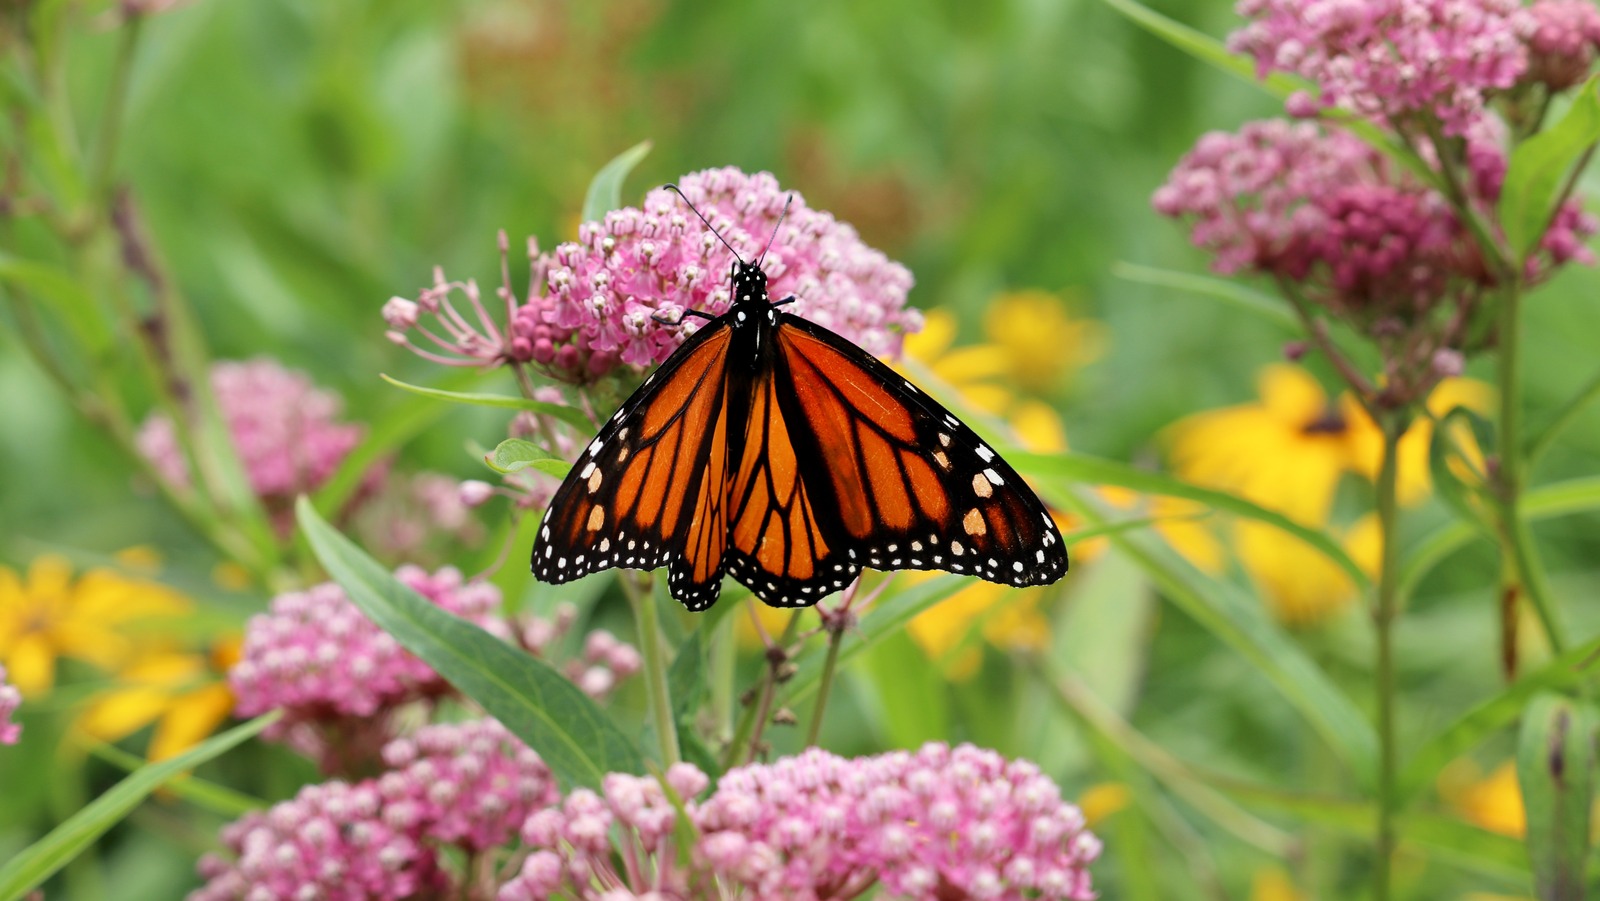 How To Get Free Milkweed Seeds For A Stunning Butterfly Garden